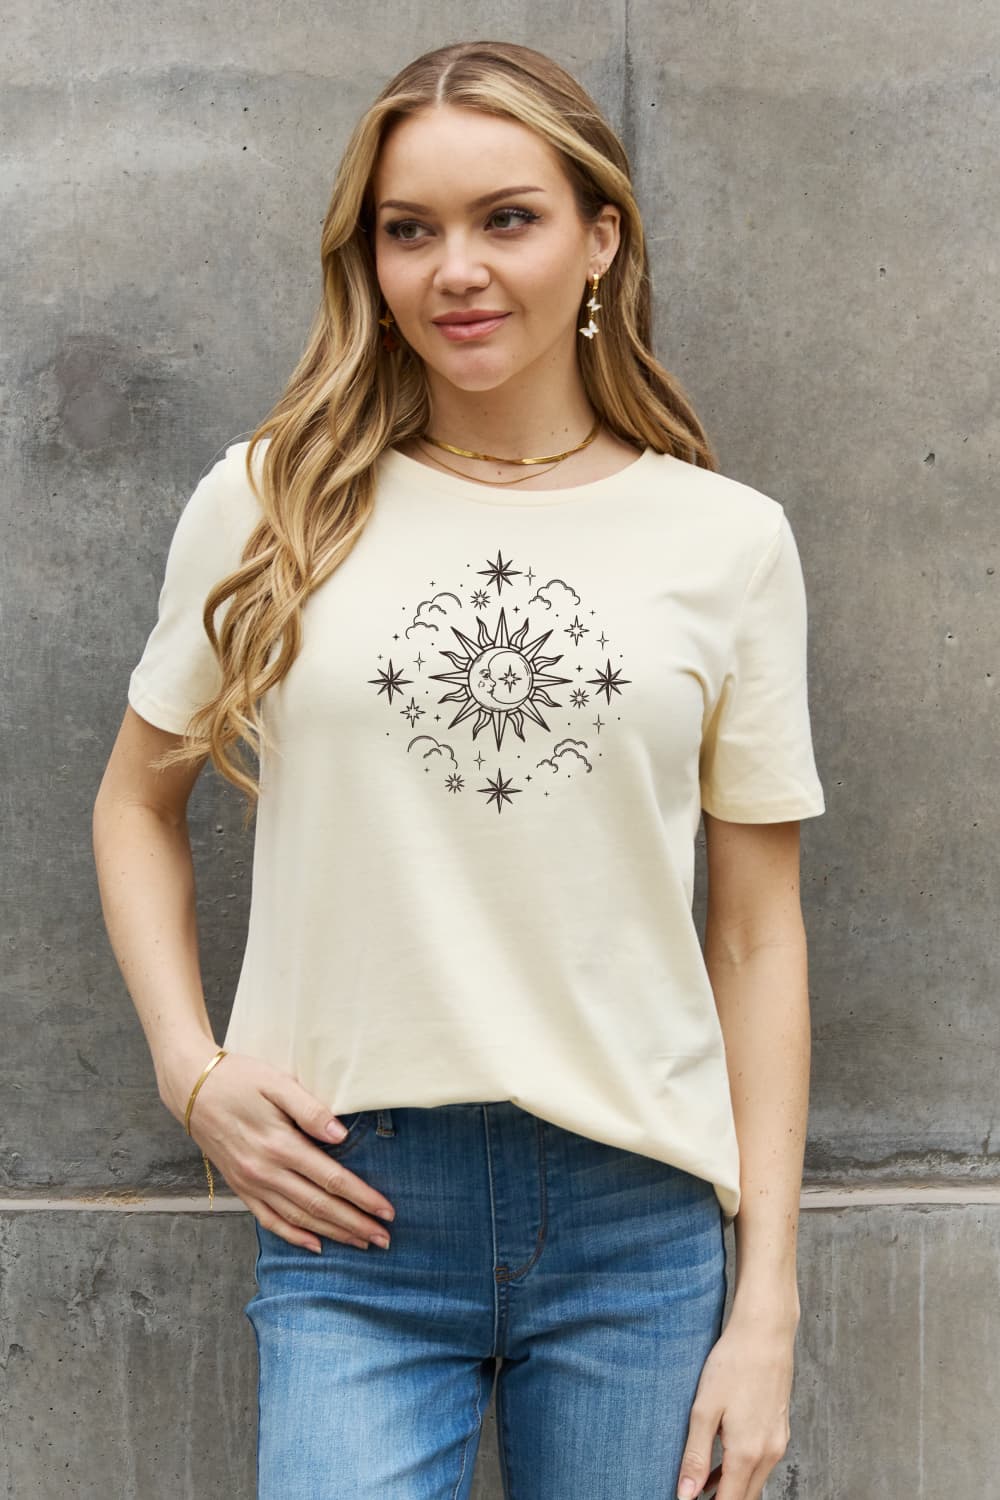 SUN MOON CLOUDS Celestial Graphic Short Sleeve 100% Cotton Tee Shirt (Plus Size Available)